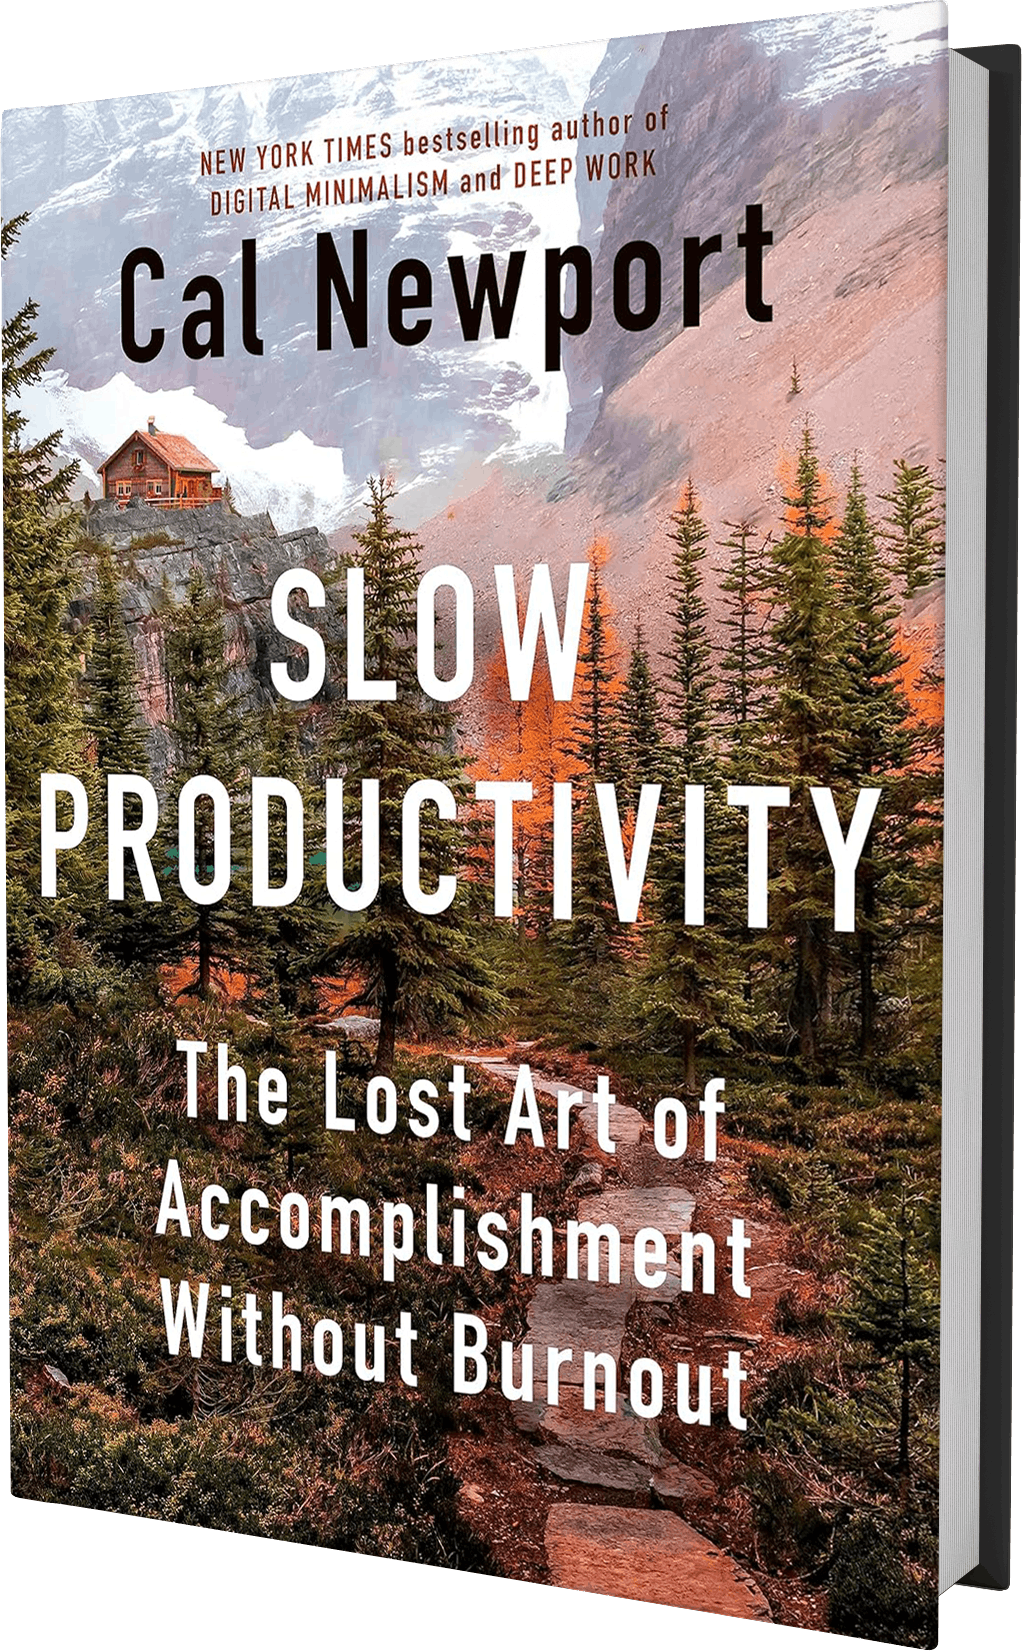 Cover art of Slow Productivity by Cal Newport